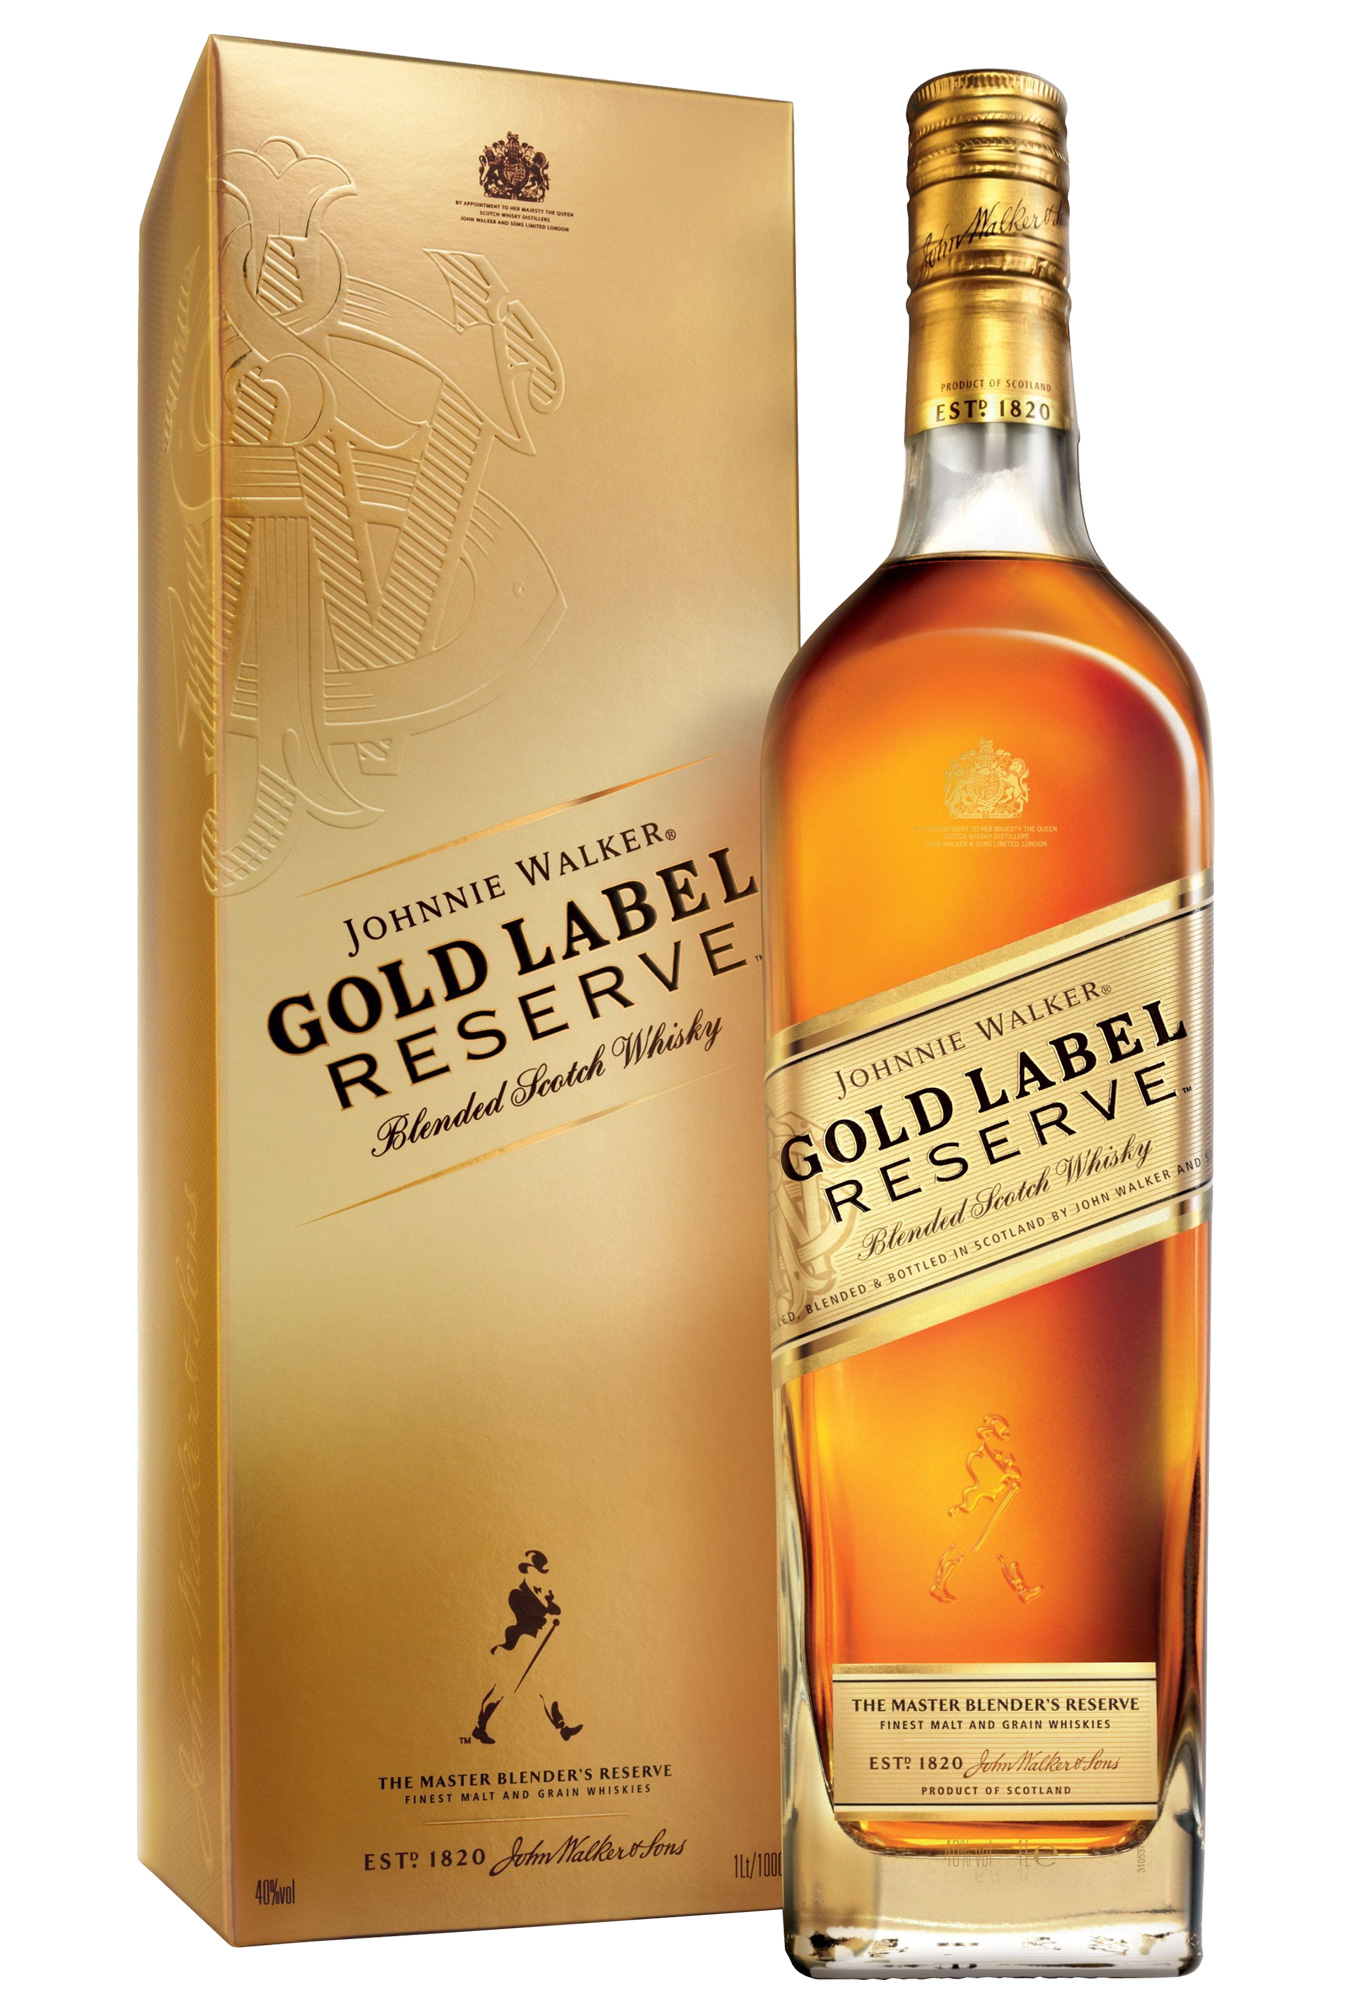 7896010001303 - WHISKY GOLD CUP